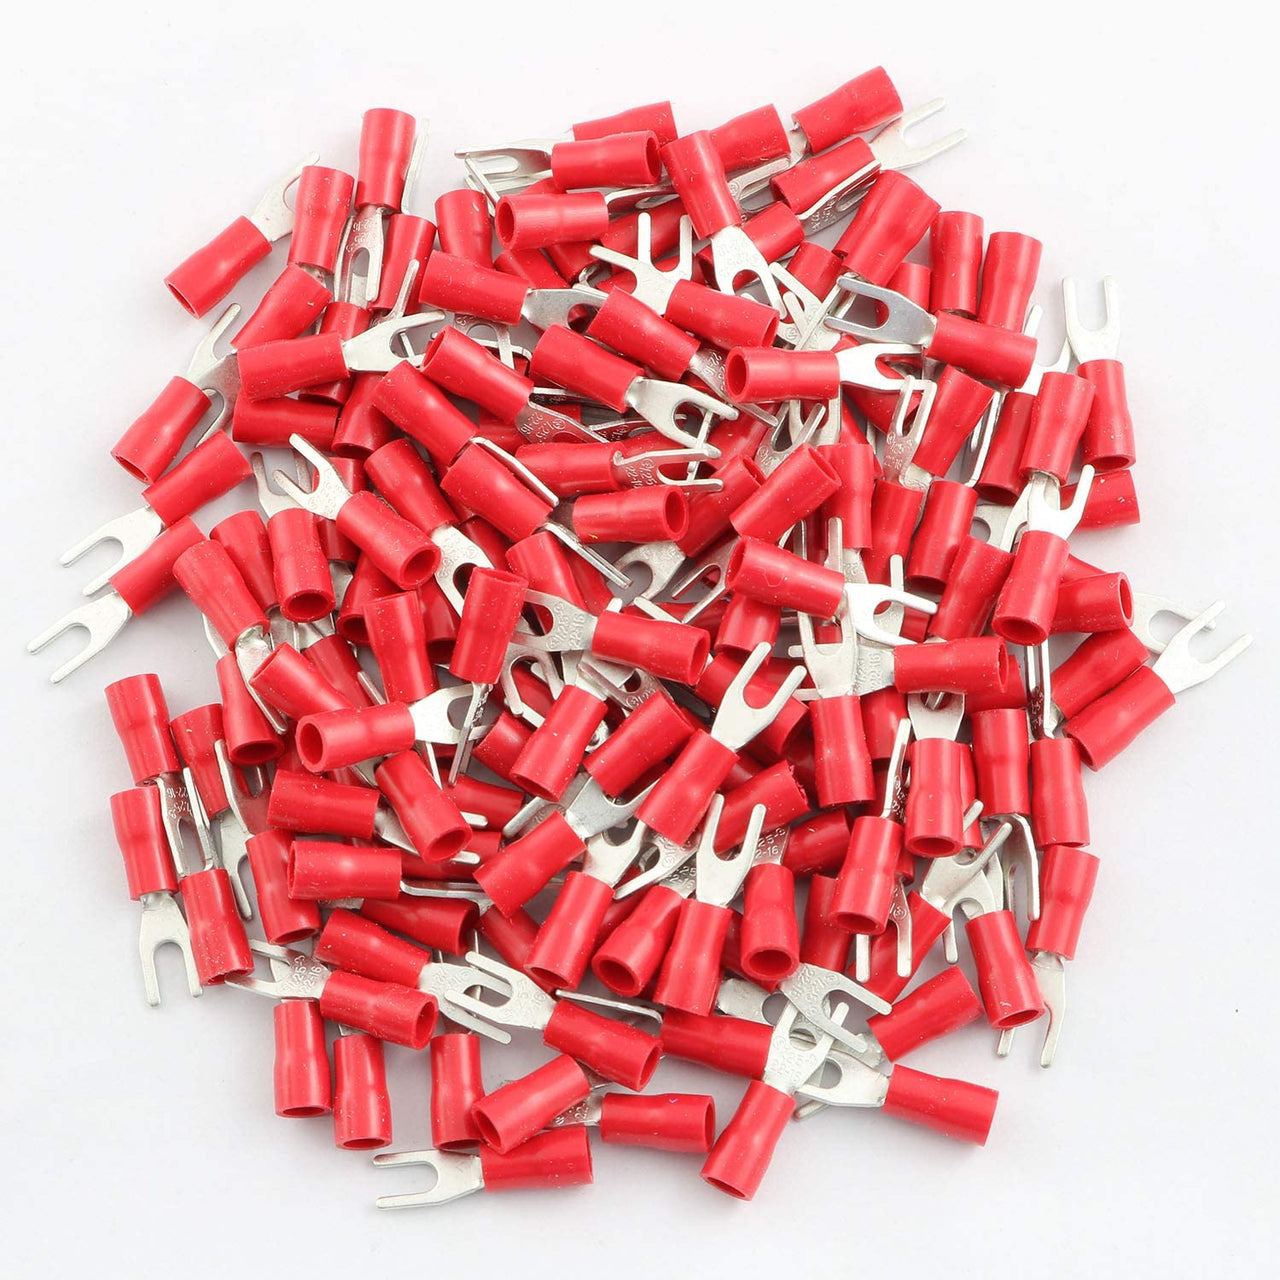 PATRON PSR8-200 200PCS #8 Red Insulated Fork Spade Wire Connector Electrical Crimp Terminal 18-22AWG